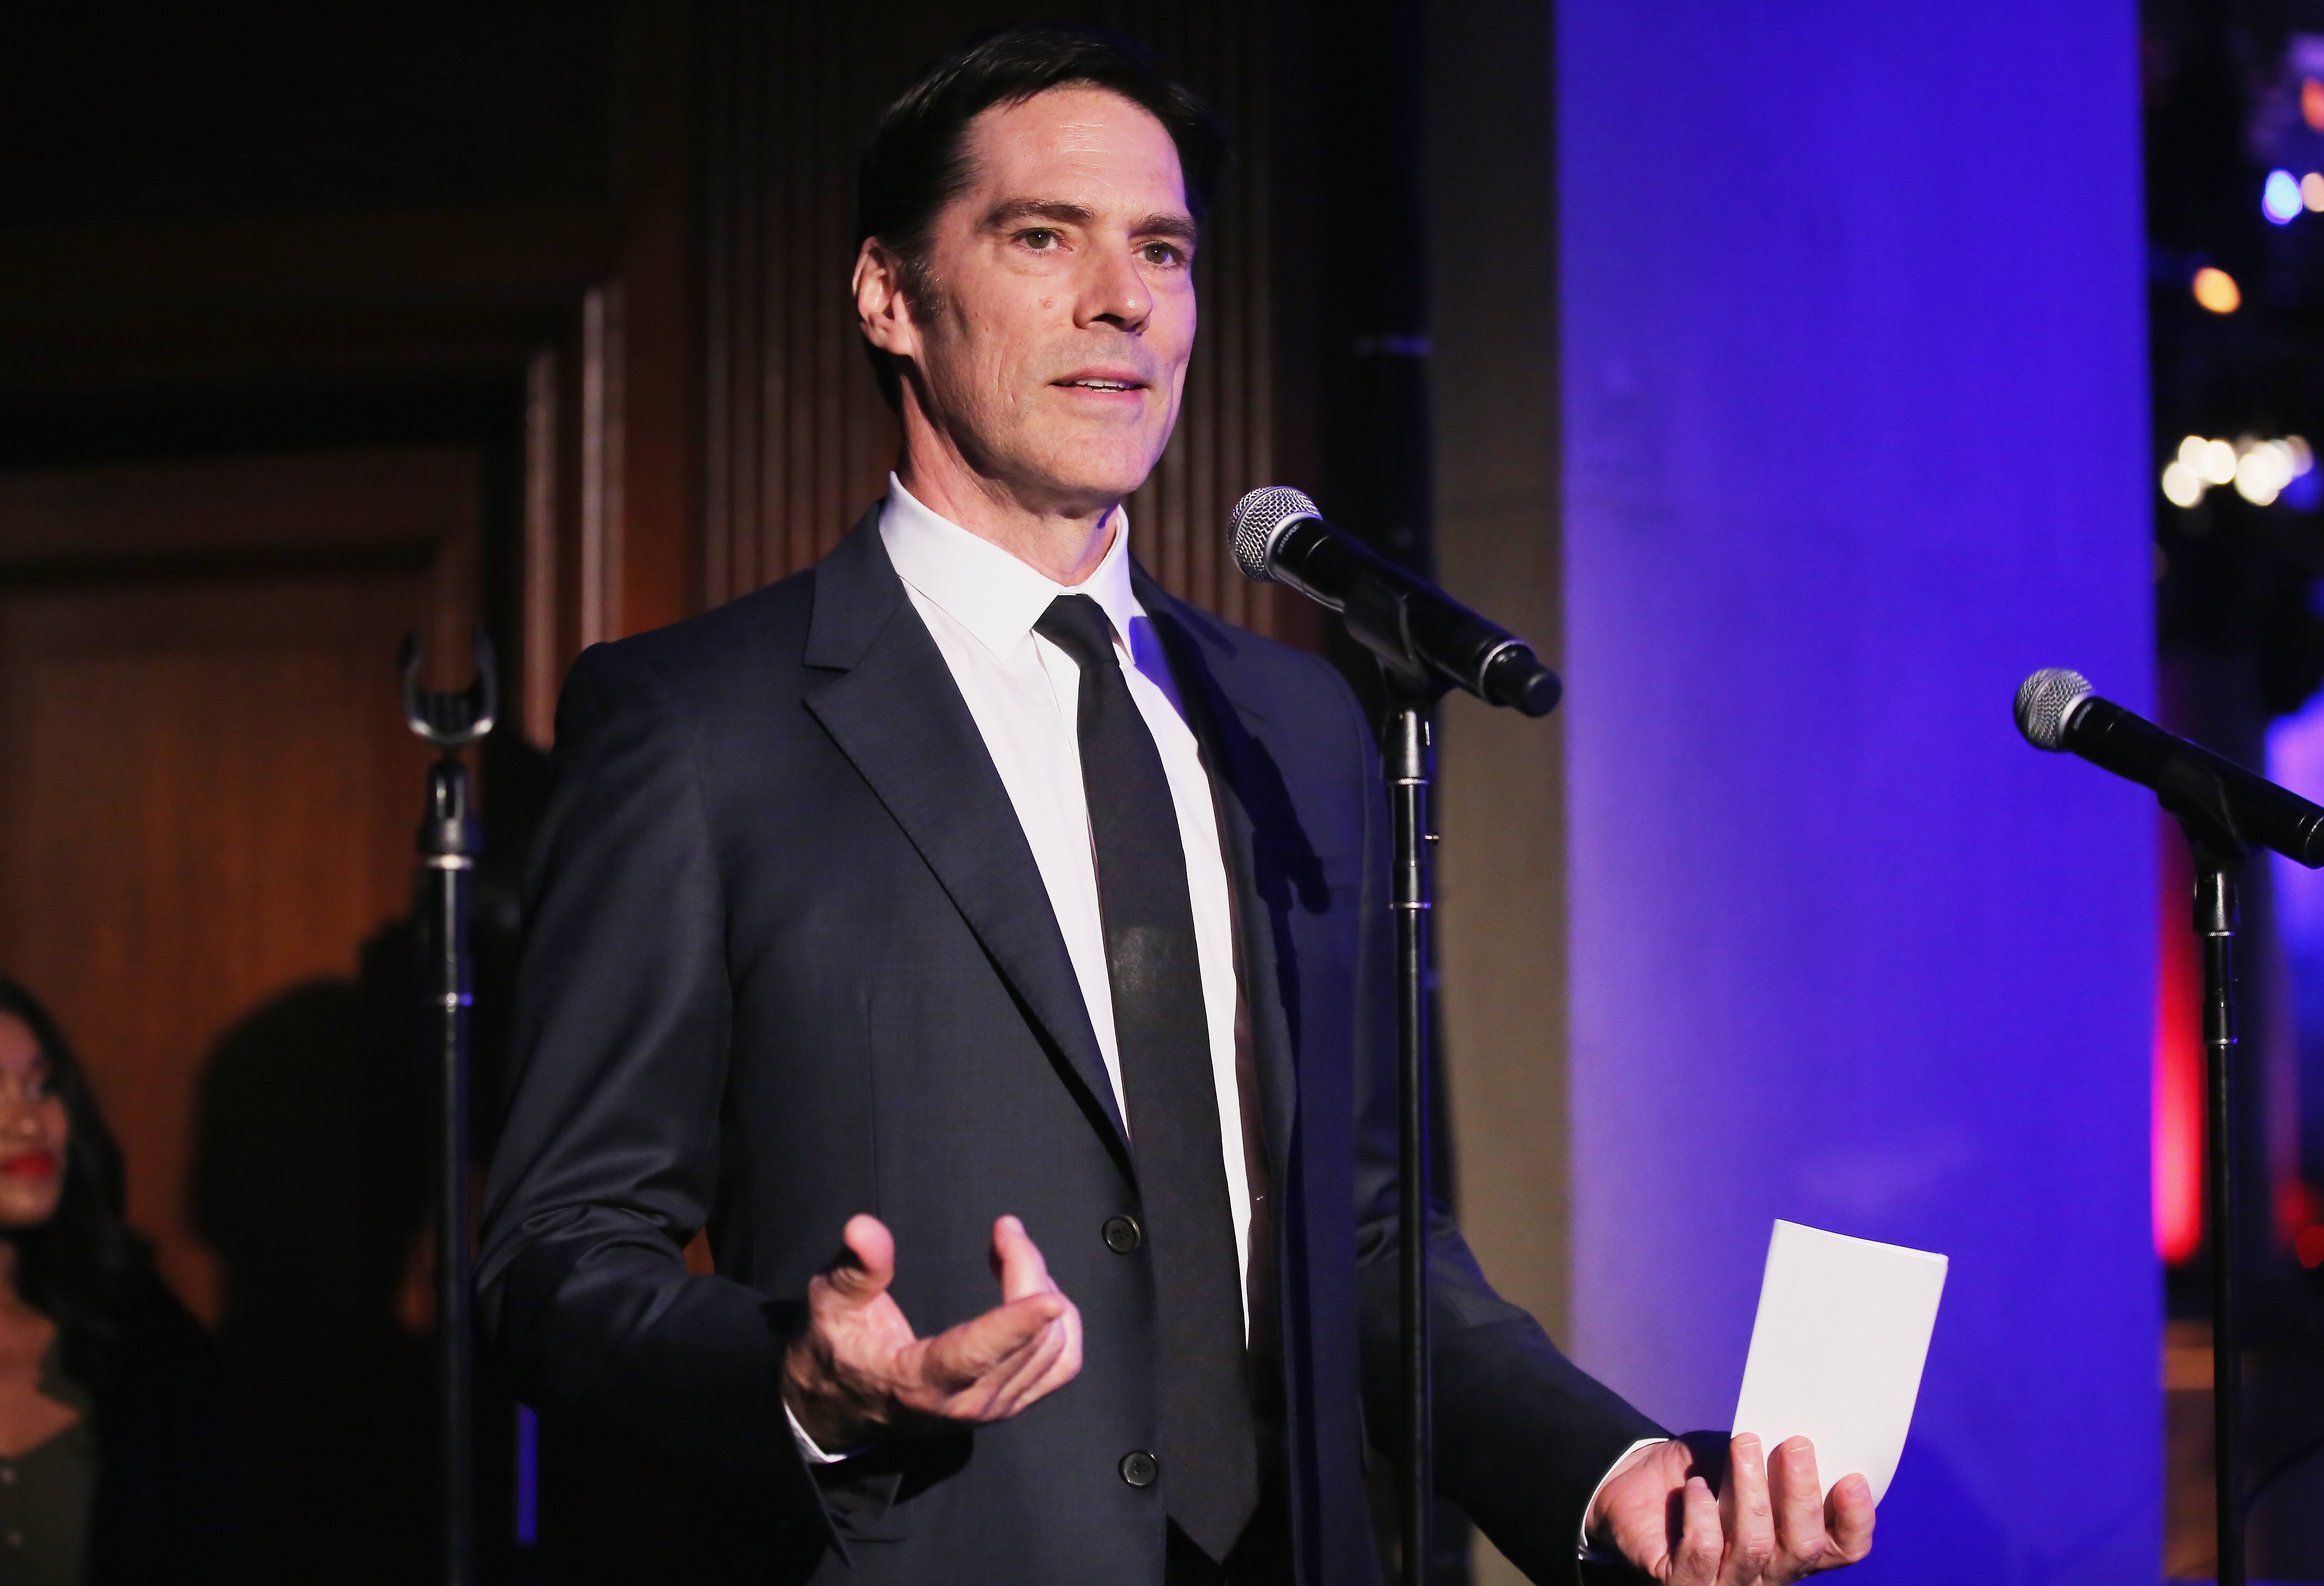 Thomas Gibson on May 31, 2018 at Gotham Hall in New York City | Source: Getty Images